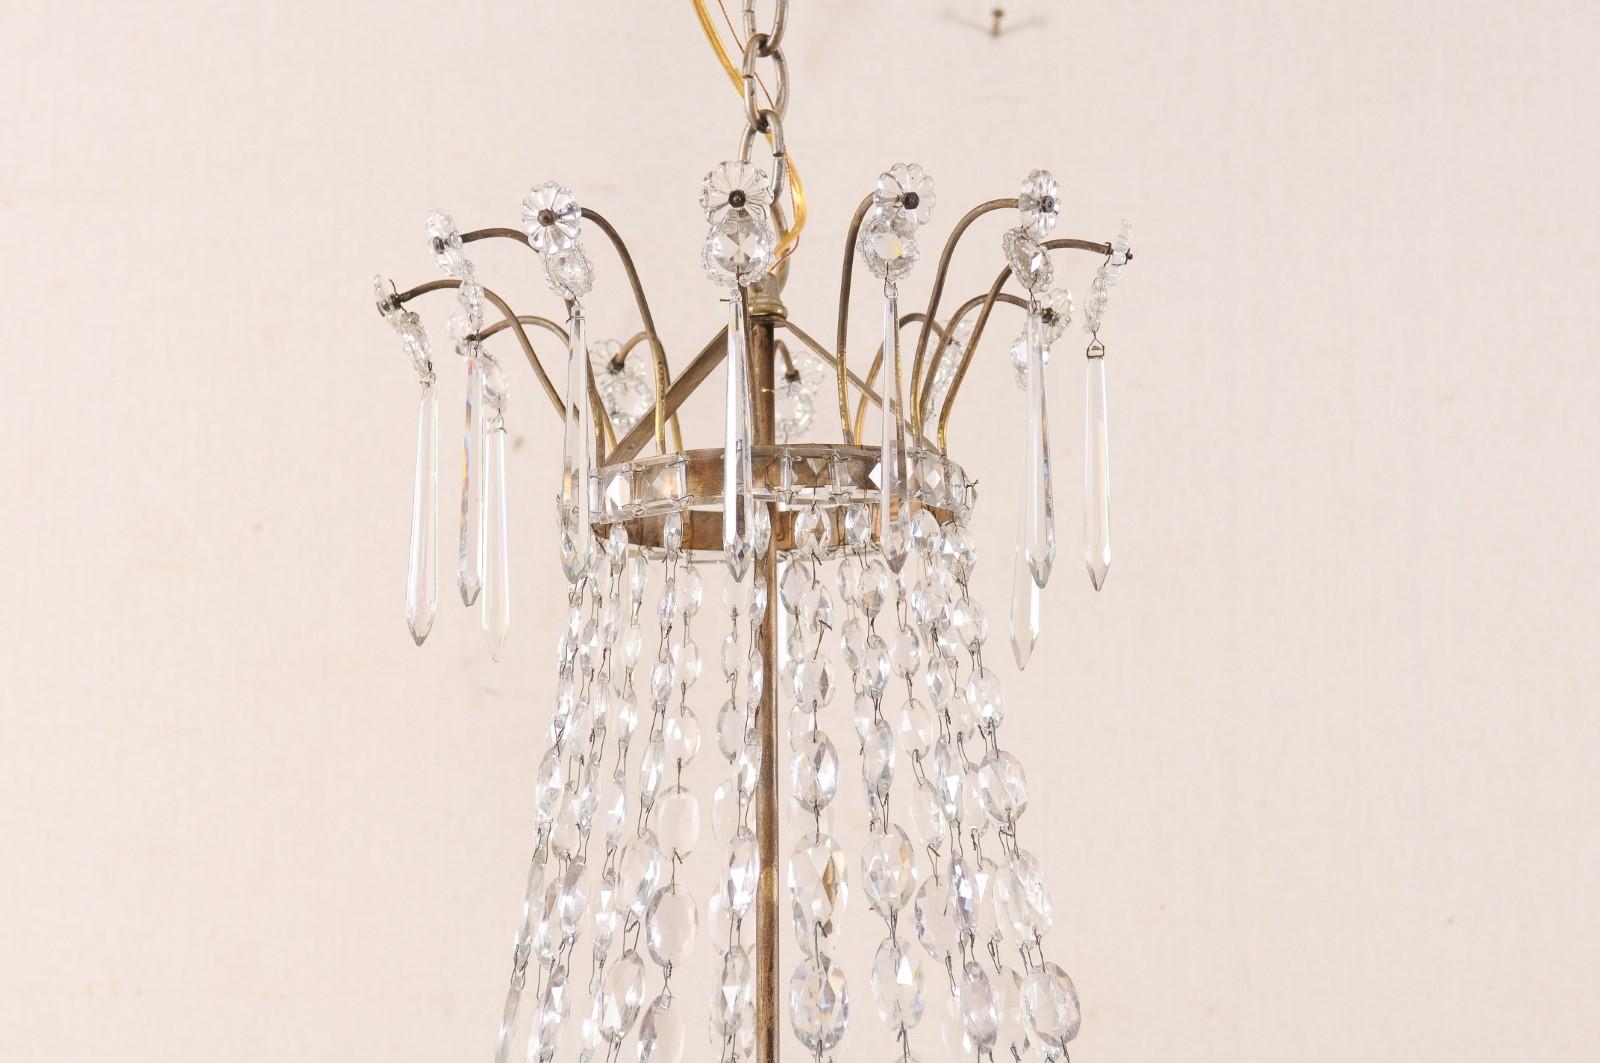 Pair of French Vintage Empire Style Six-Light Crystal Basket-Shaped Chandeliers In Good Condition For Sale In Atlanta, GA